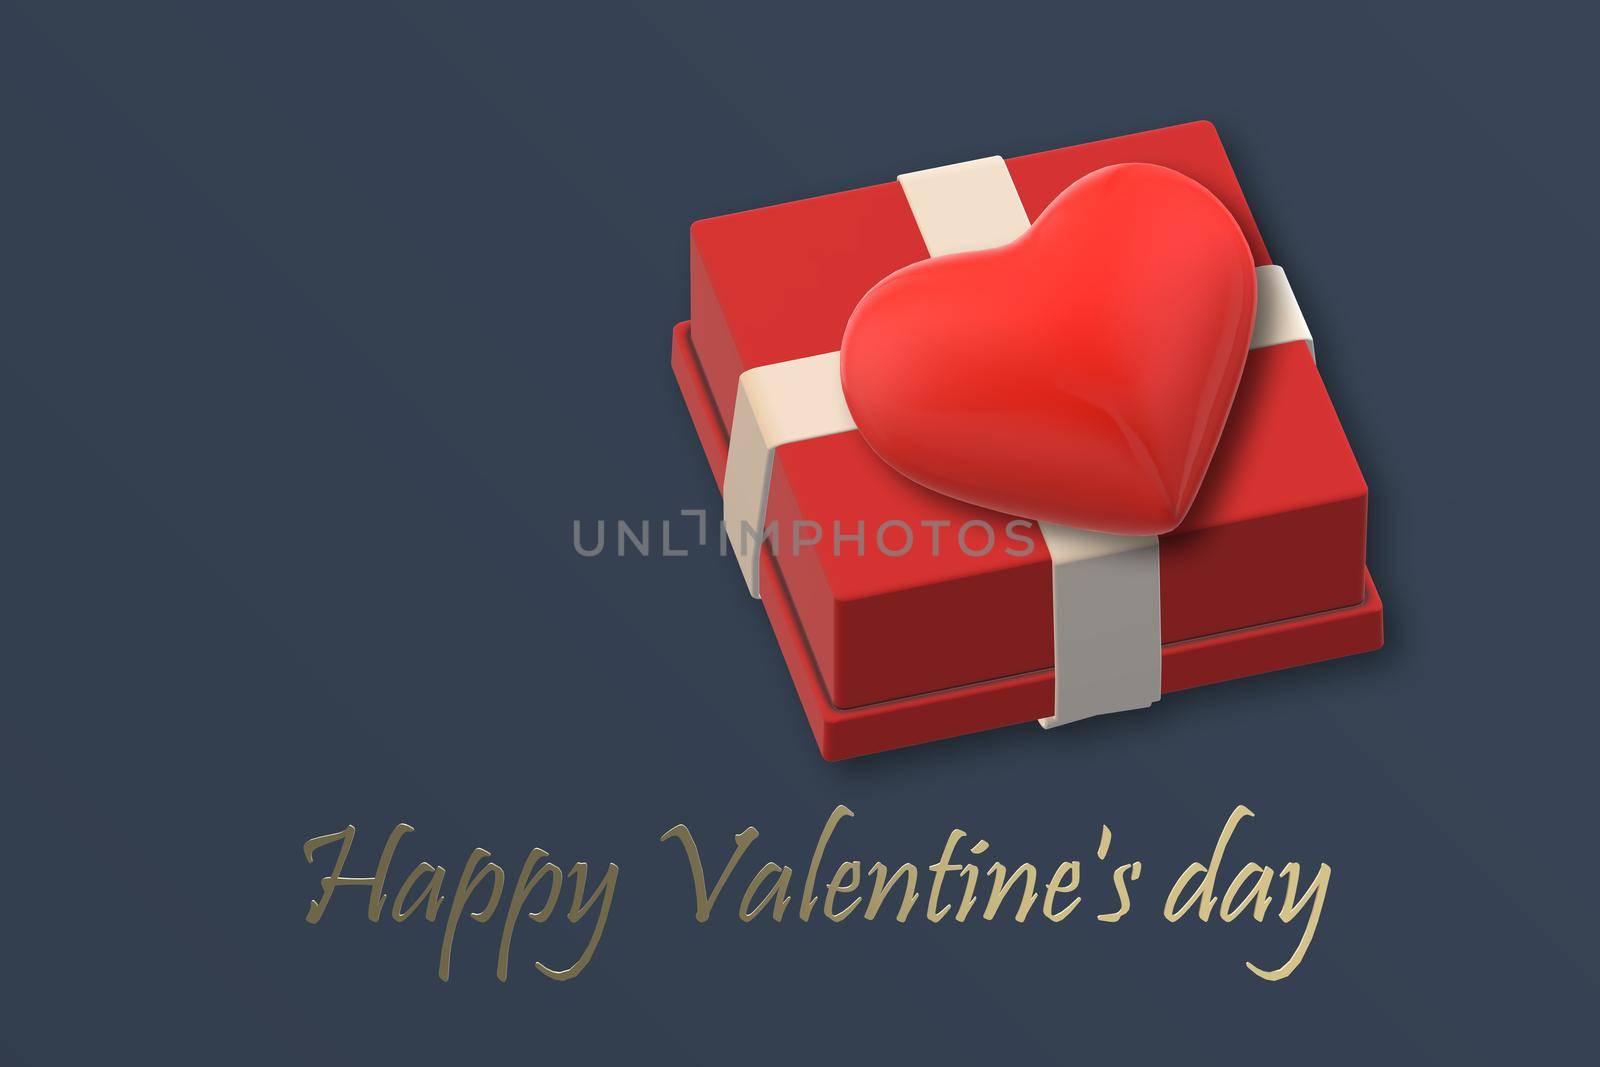 Valentine's day gift box red heart over blue background. Gold text Happy Valentine's day with heart. 3D render